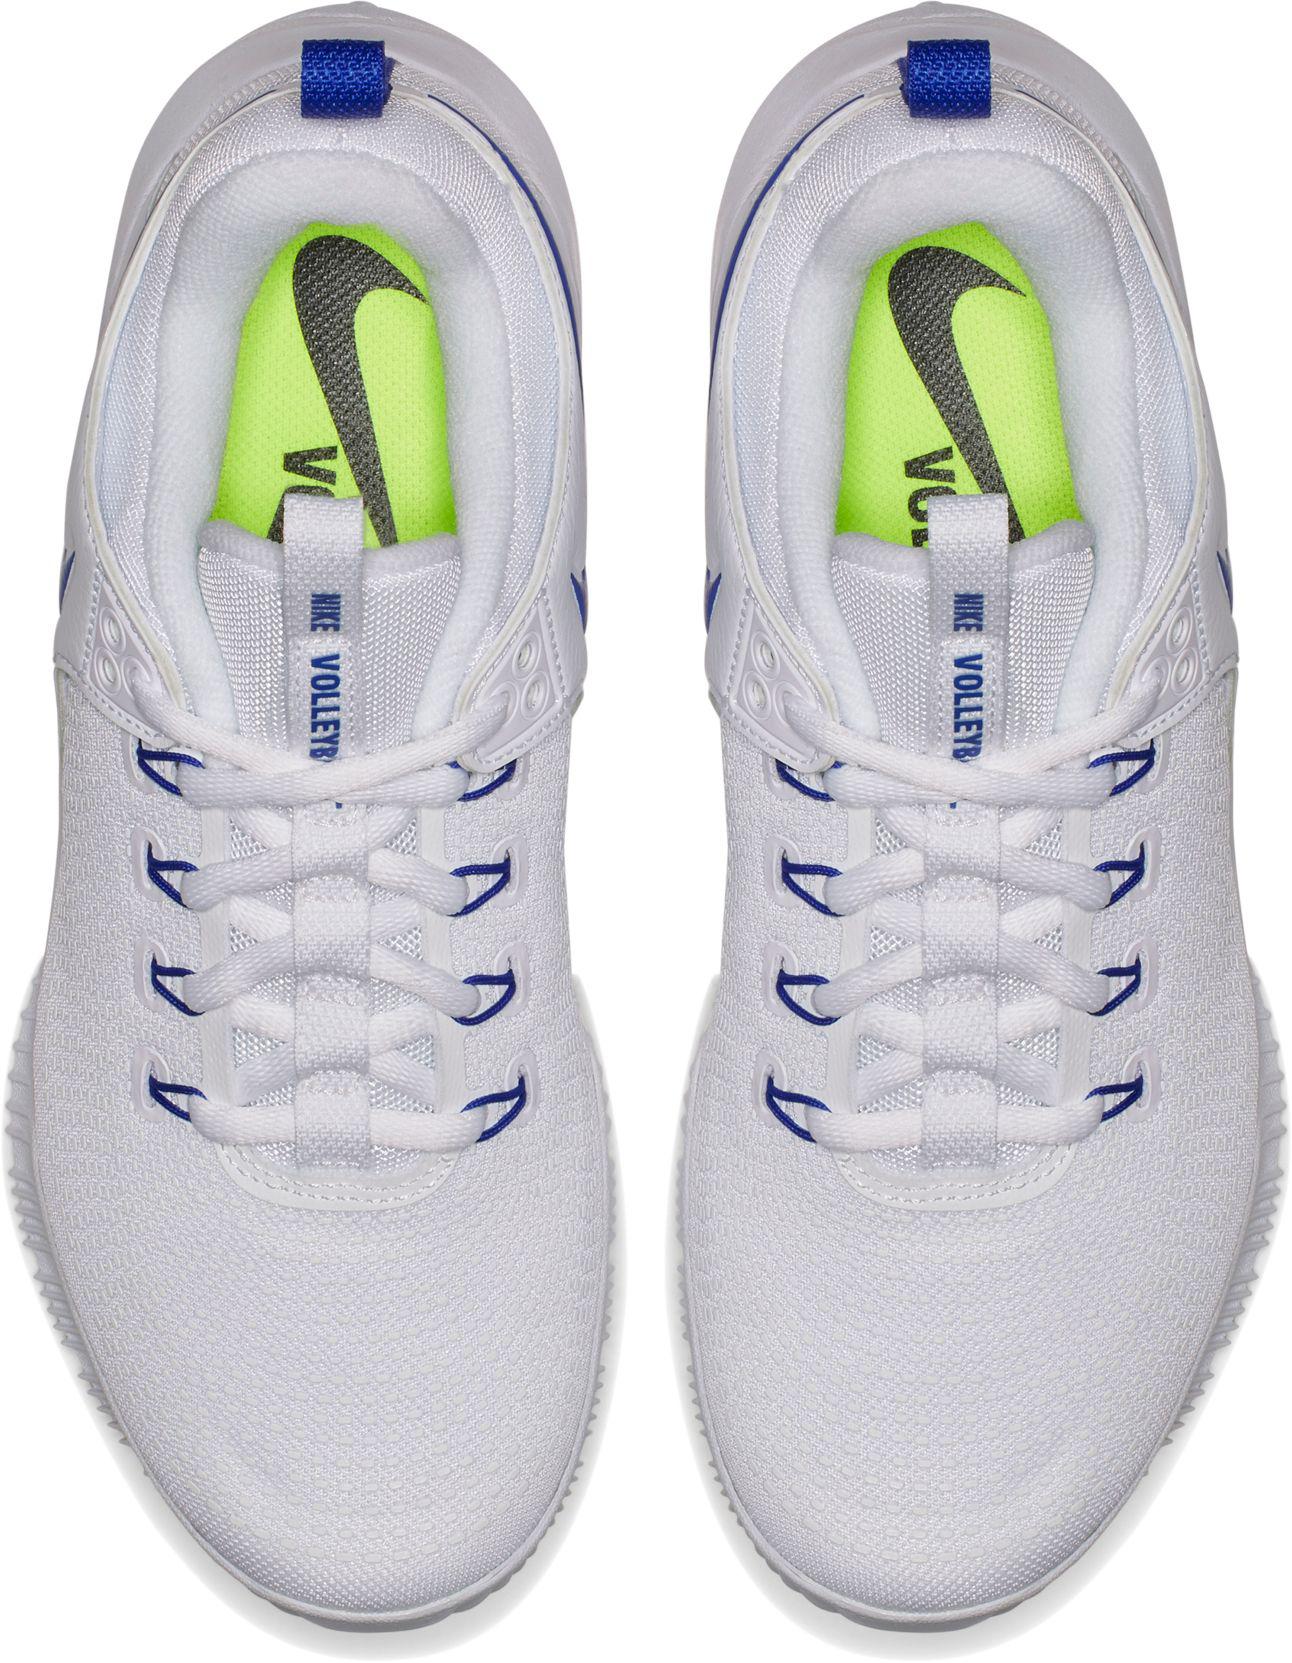 Nike Rubber Zoom Hyperace 2 Volleyball Shoes in White/Blue (Blue) | Lyst